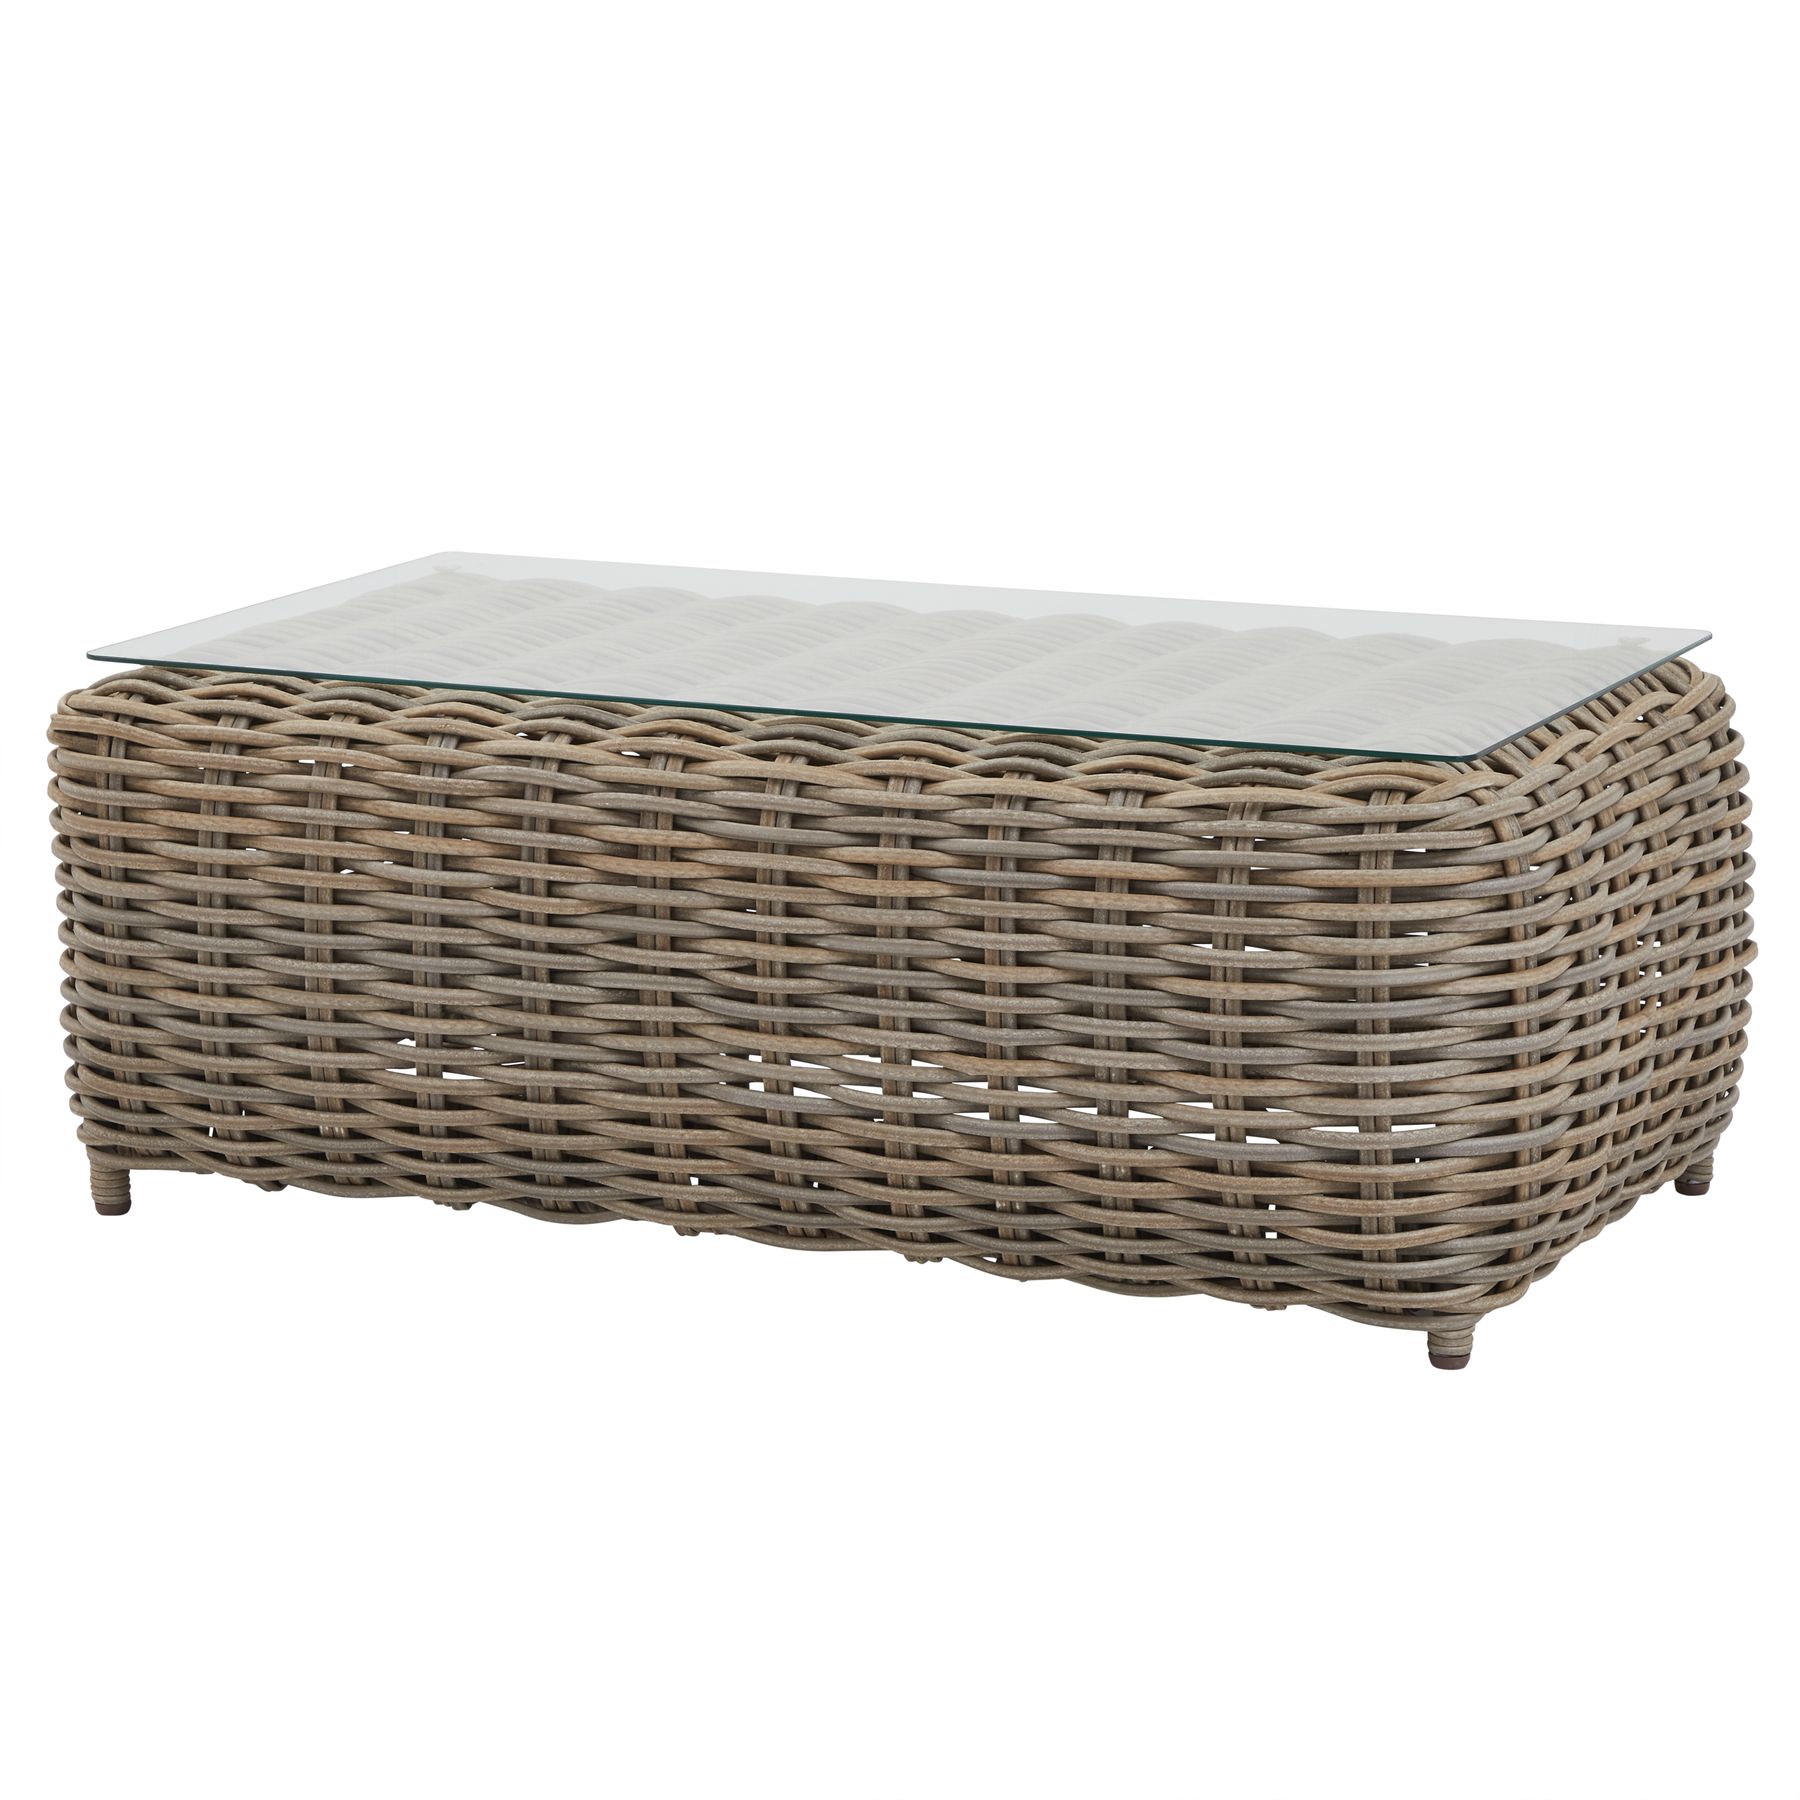 Amalfi Collection Outdoor Five Seater Set - Image 6